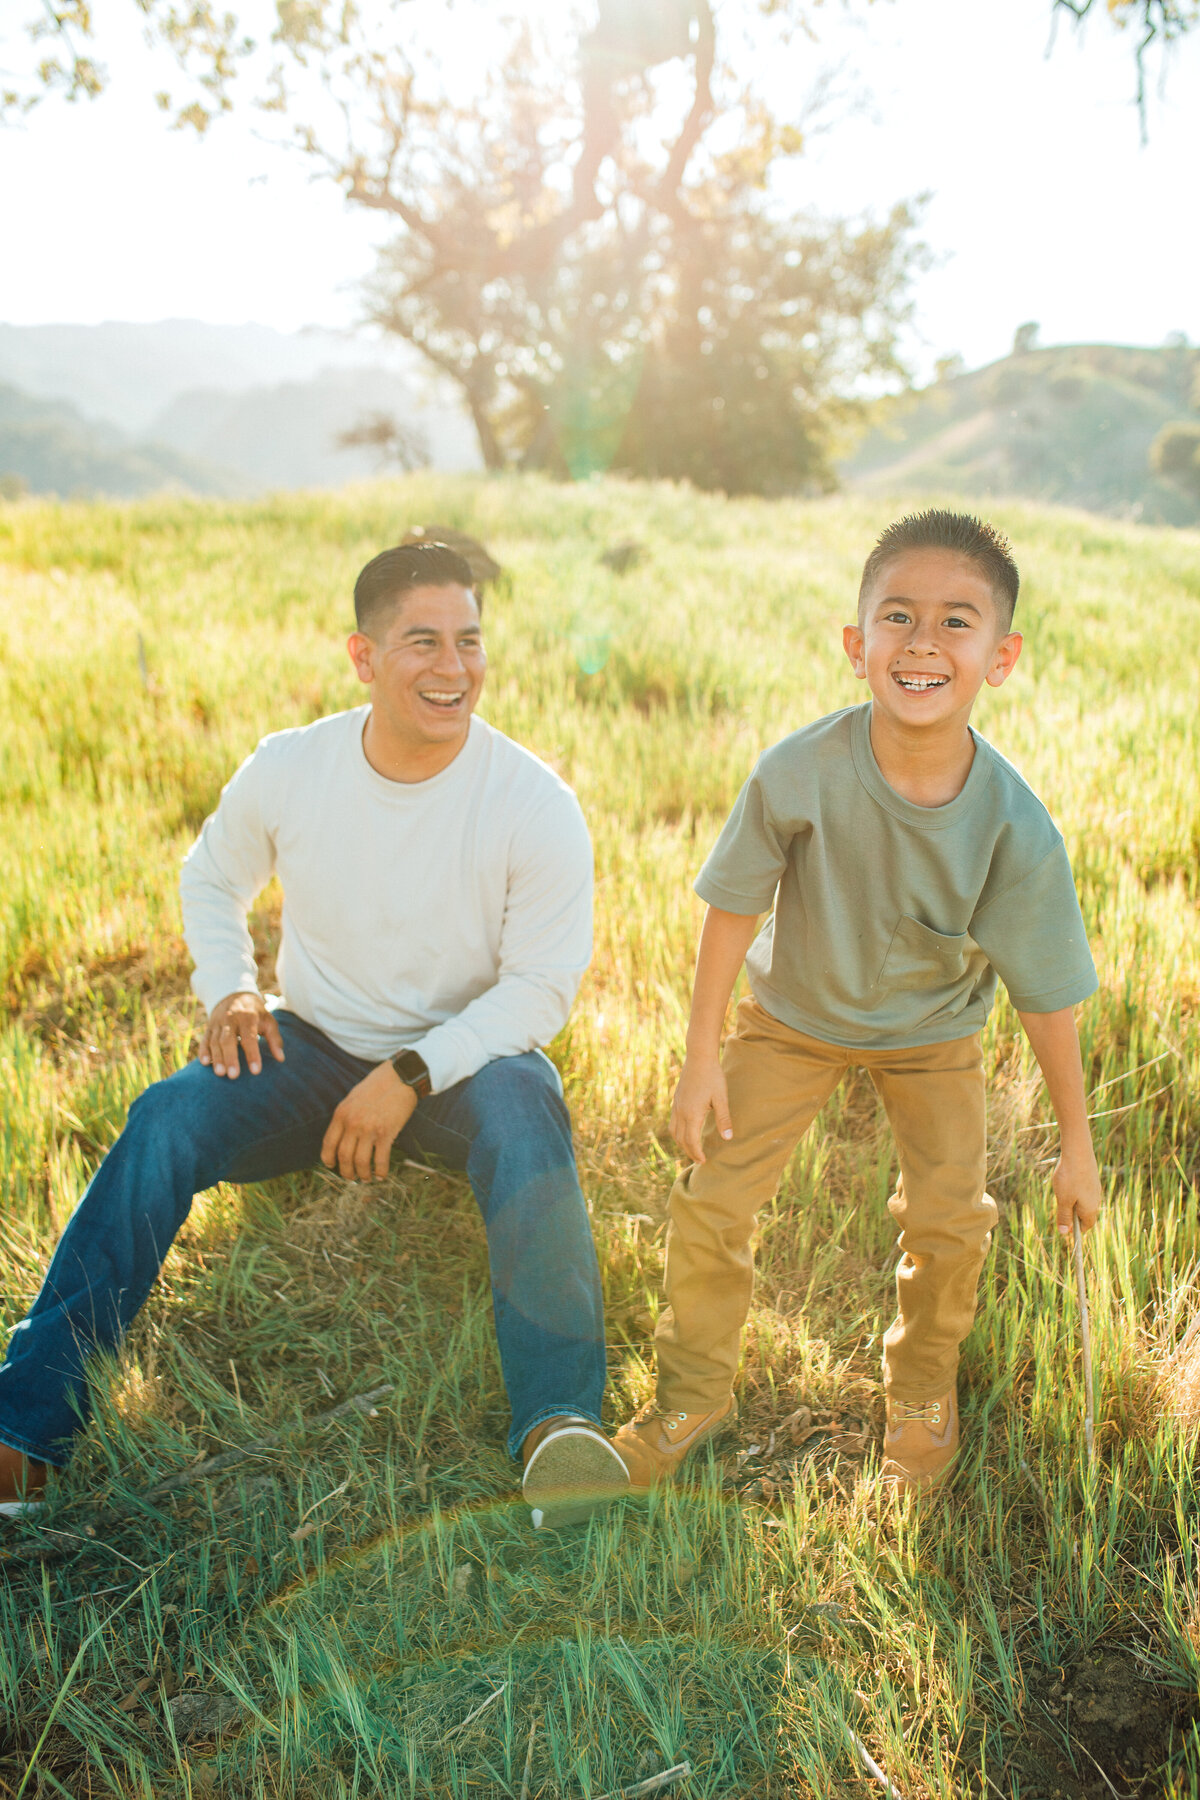 Family Portrait Photo Of Father In White Sweater With His Son In Green Shirt Los Angeles